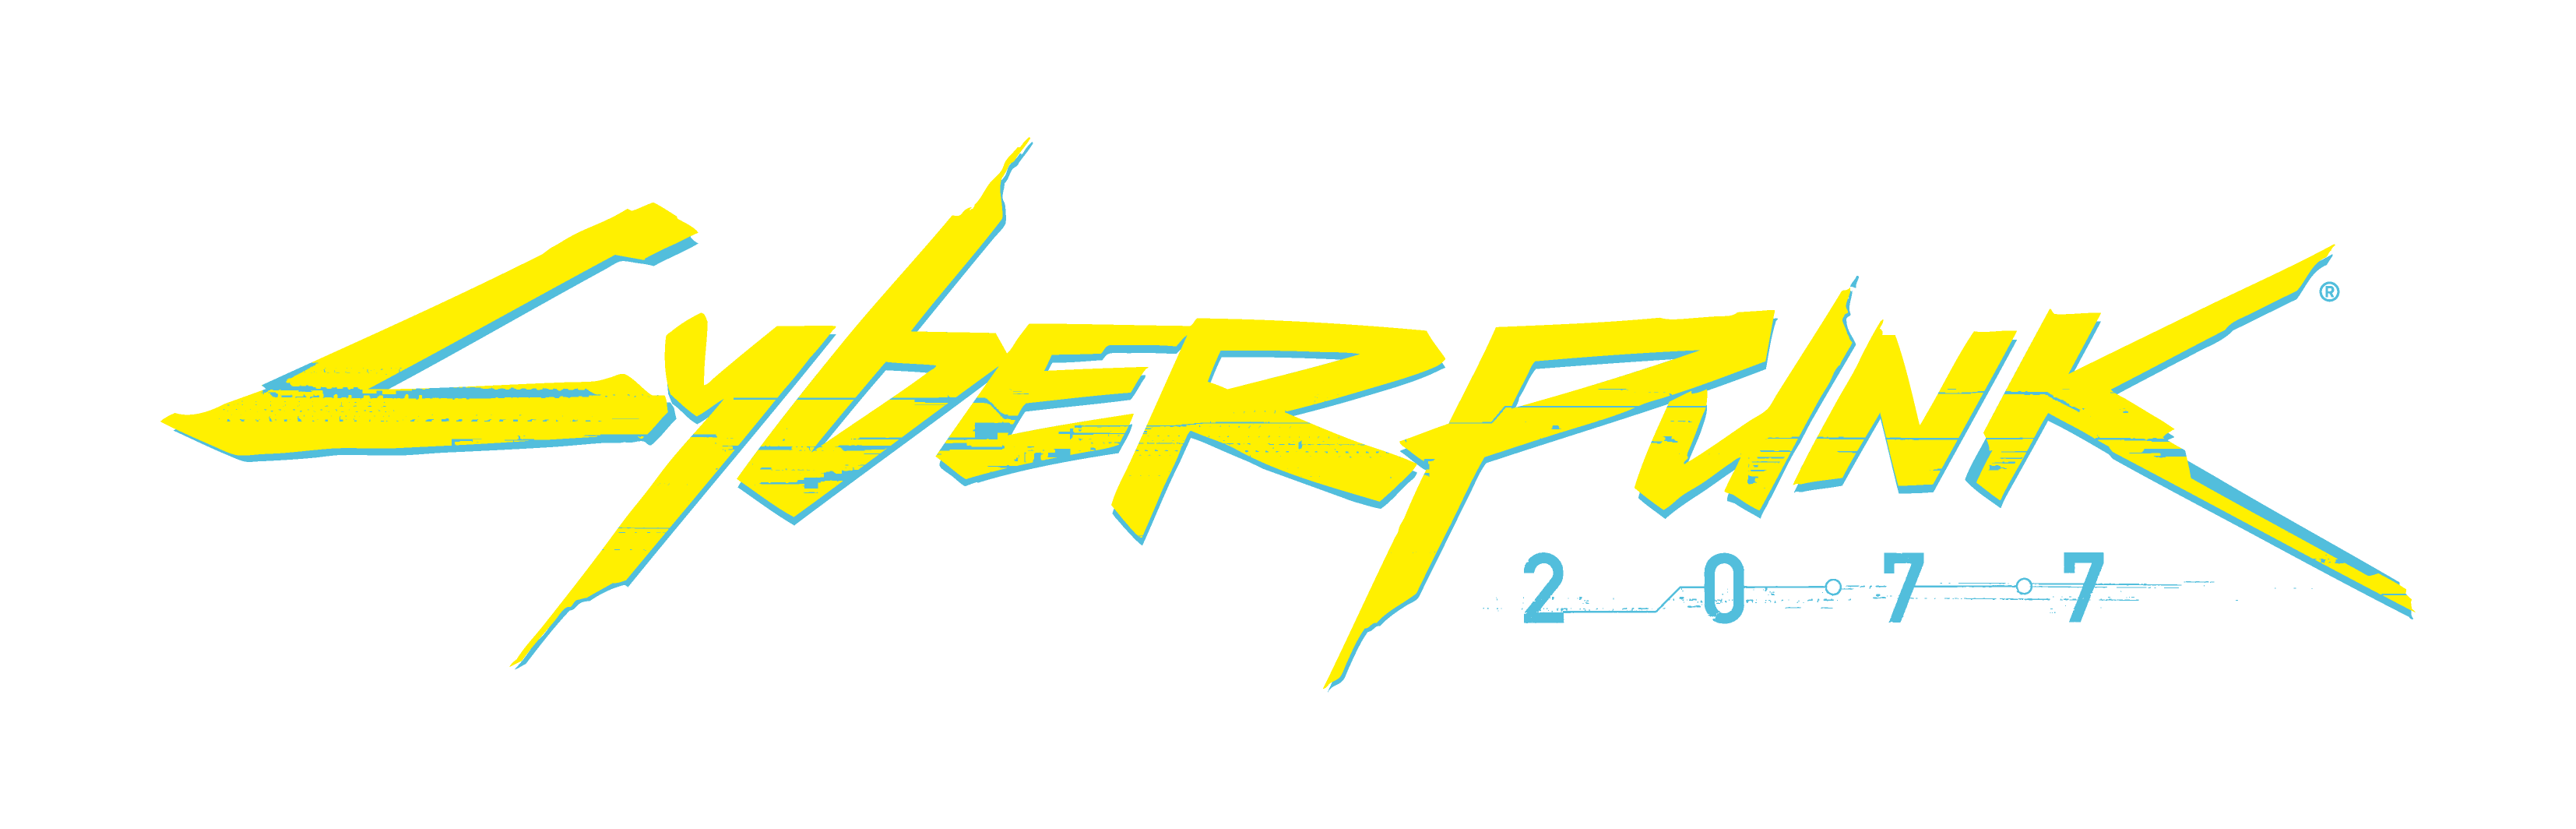 Cyberpunk 2077 PNG HD Quality PNG Clipart Background